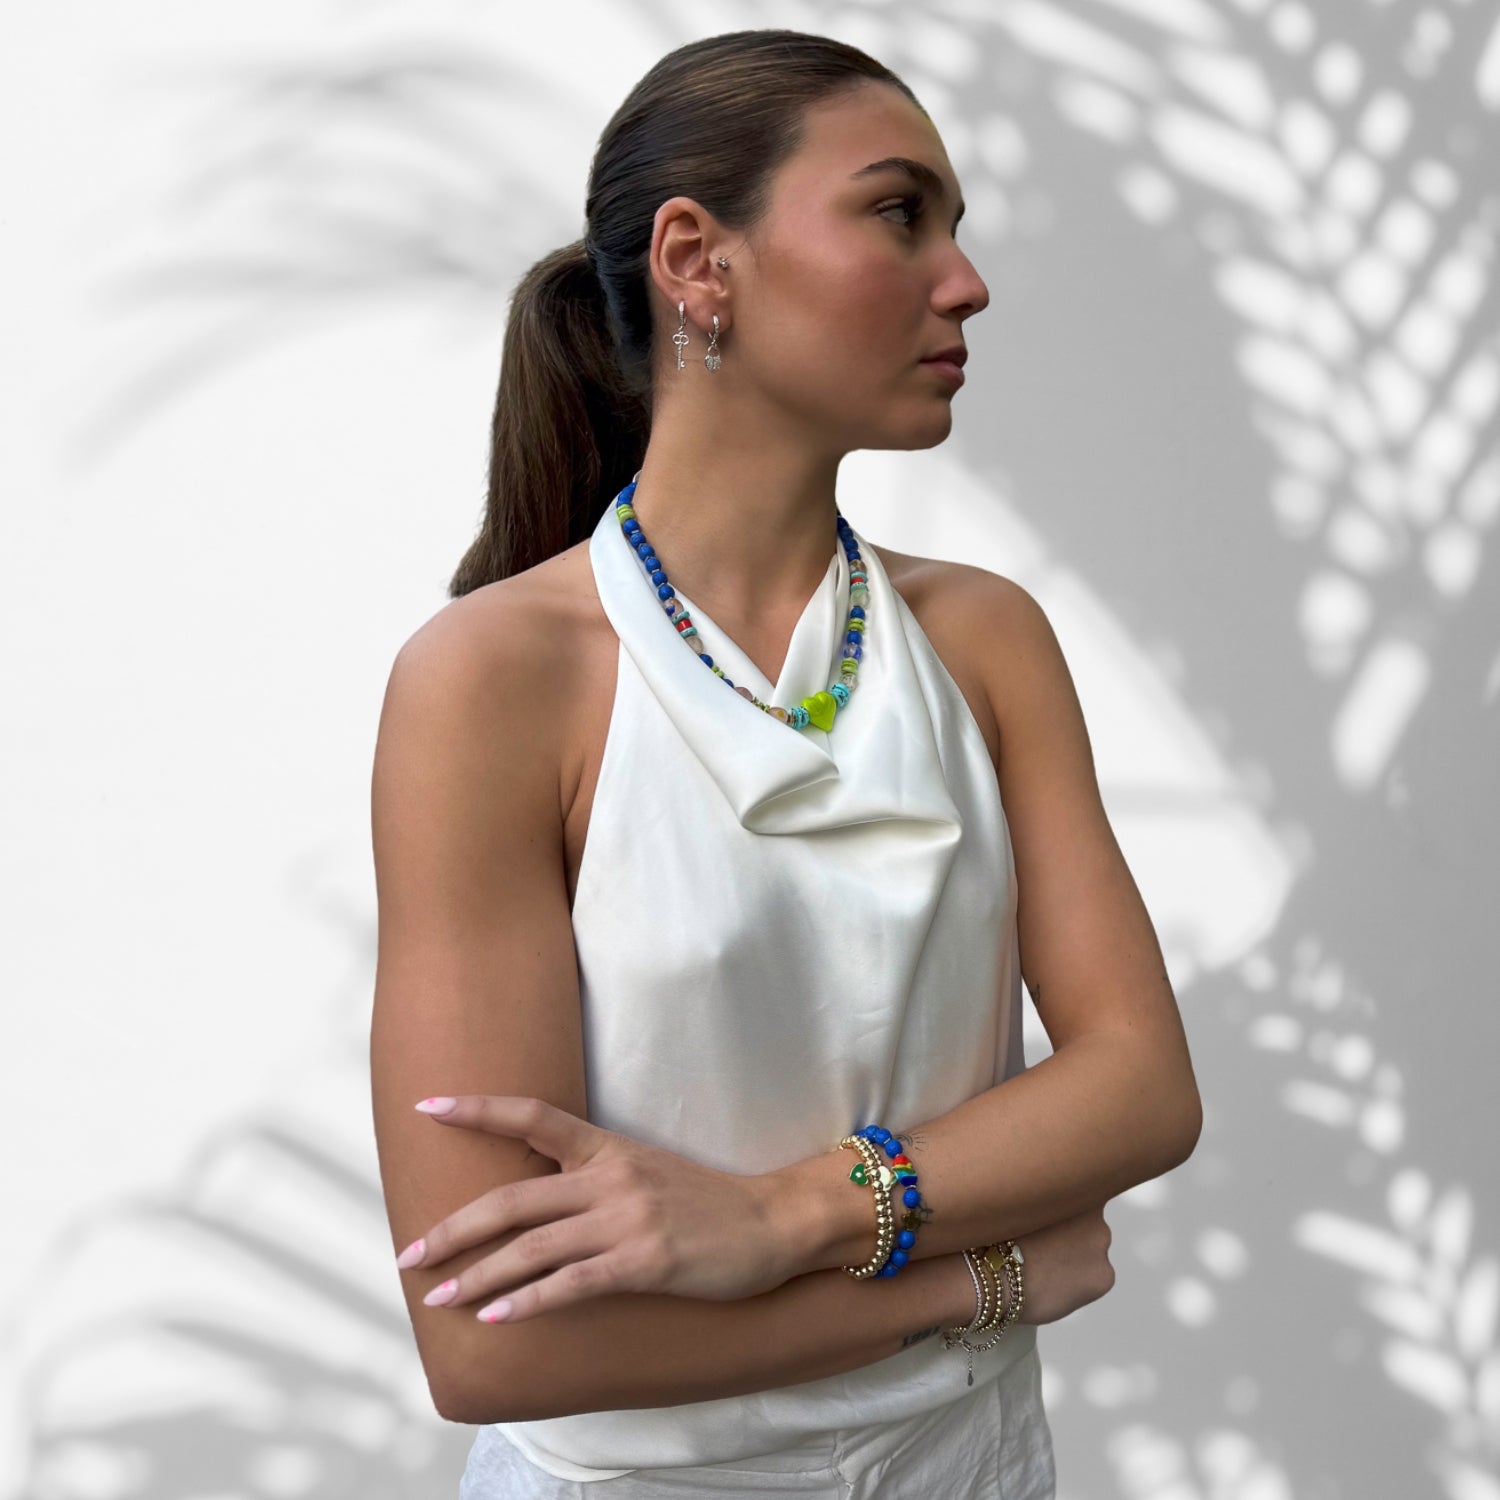 Harmony of Cultures: Model Wearing a Green Ceramic Heart Boho Necklace